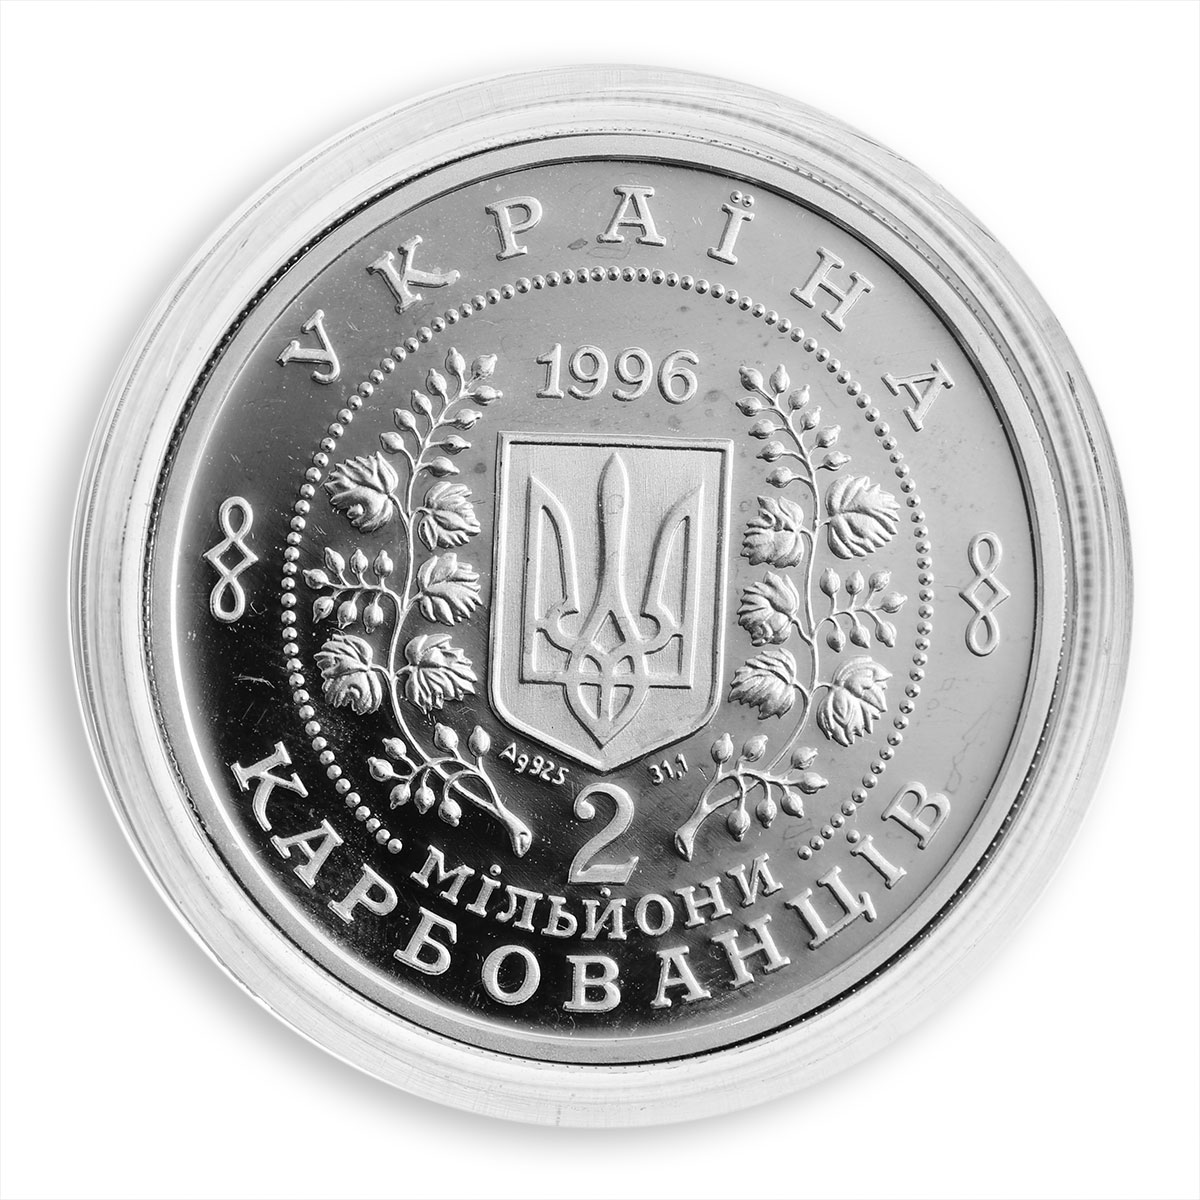 Ukraine 2 millions karbovanets Chornobyl Nuclear Power Disaster silver coin 1996